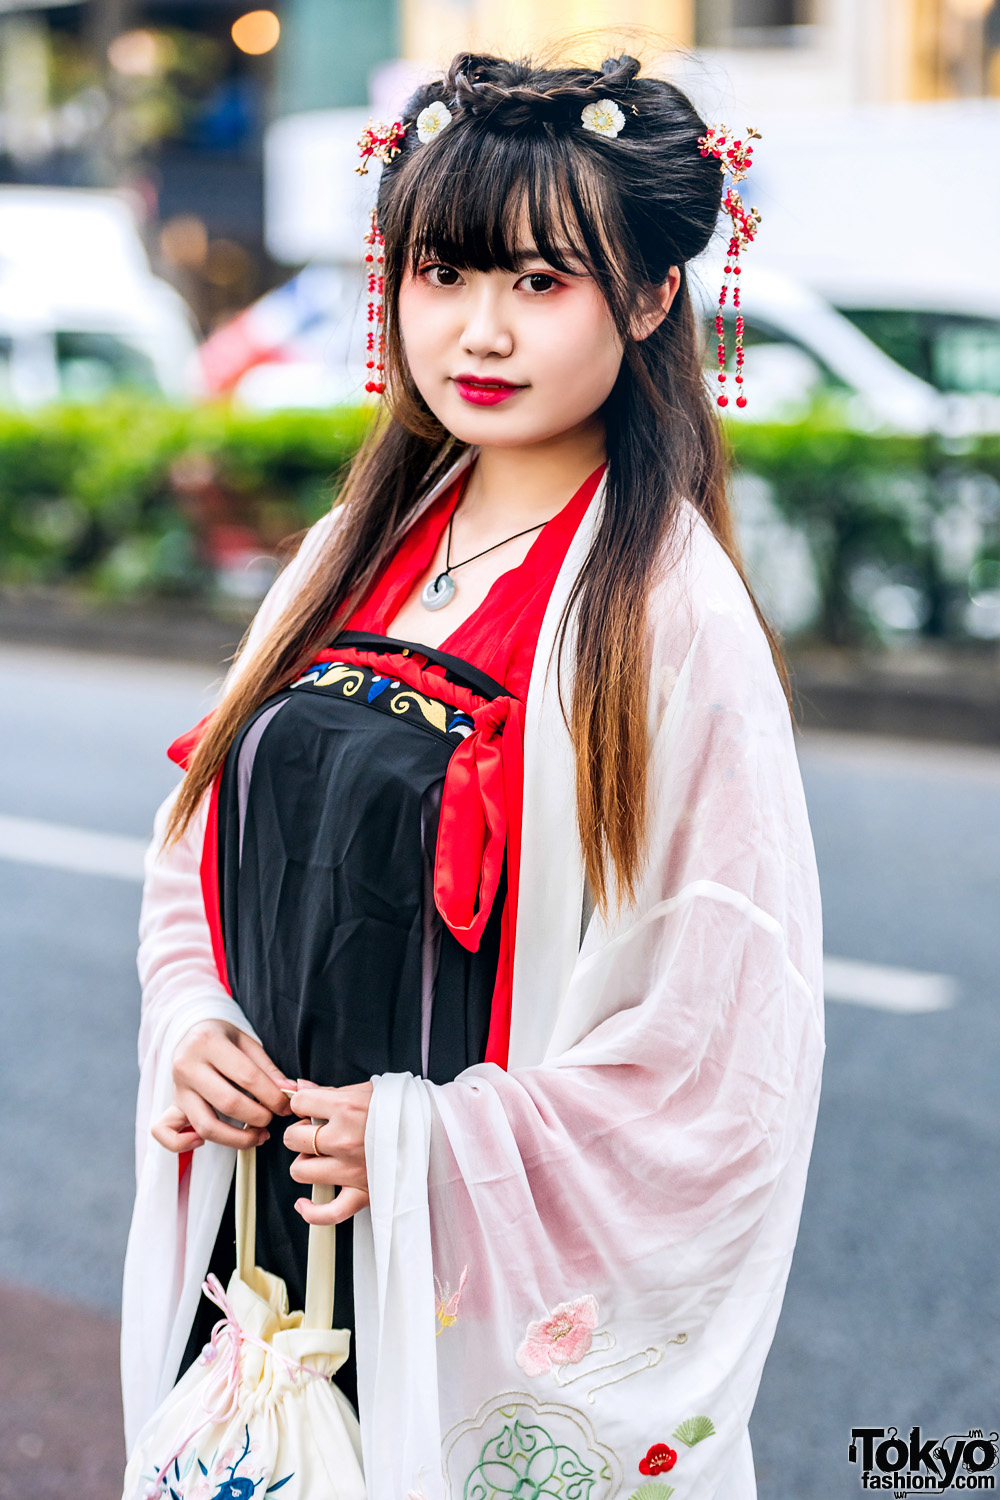 Traditional Chinese Hanfu Dresses & Floral Hair Accessories on the